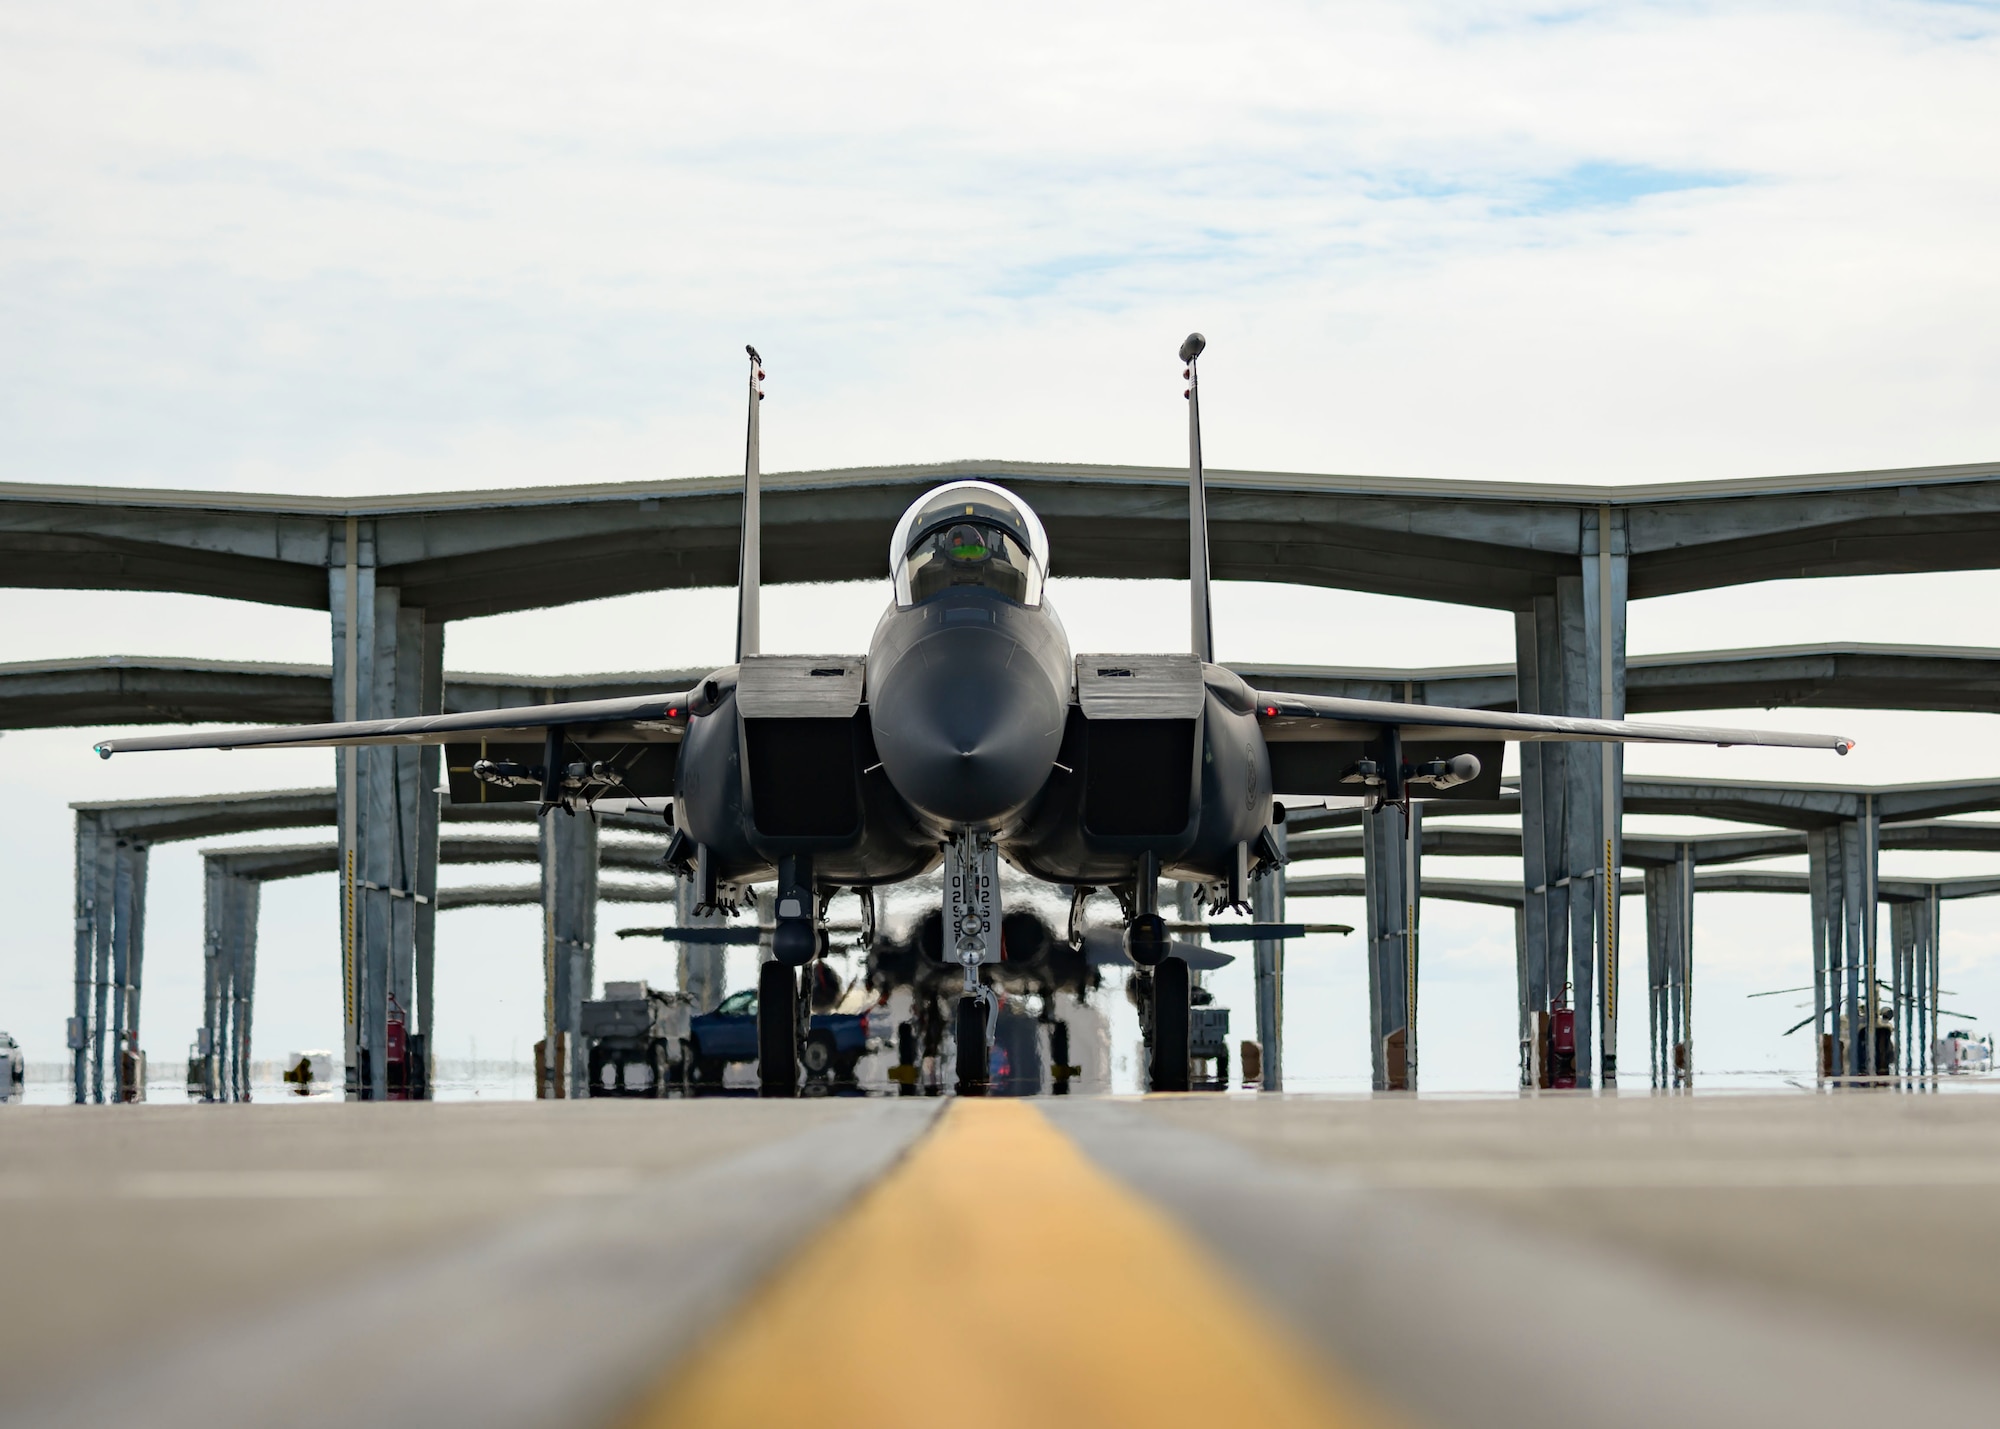 An F-15E Strike Eagle from the 391st Fighter Squadron, taxies from an overhang before flight, March 20, 2020, at Mountain Home Air Force Base, Idaho. The 391st FS is designated as an expeditionary squadron, deploying to support  the Air Force's air superiority. (U.S. Air Force photo by Senior Airman Tyrell Hall)